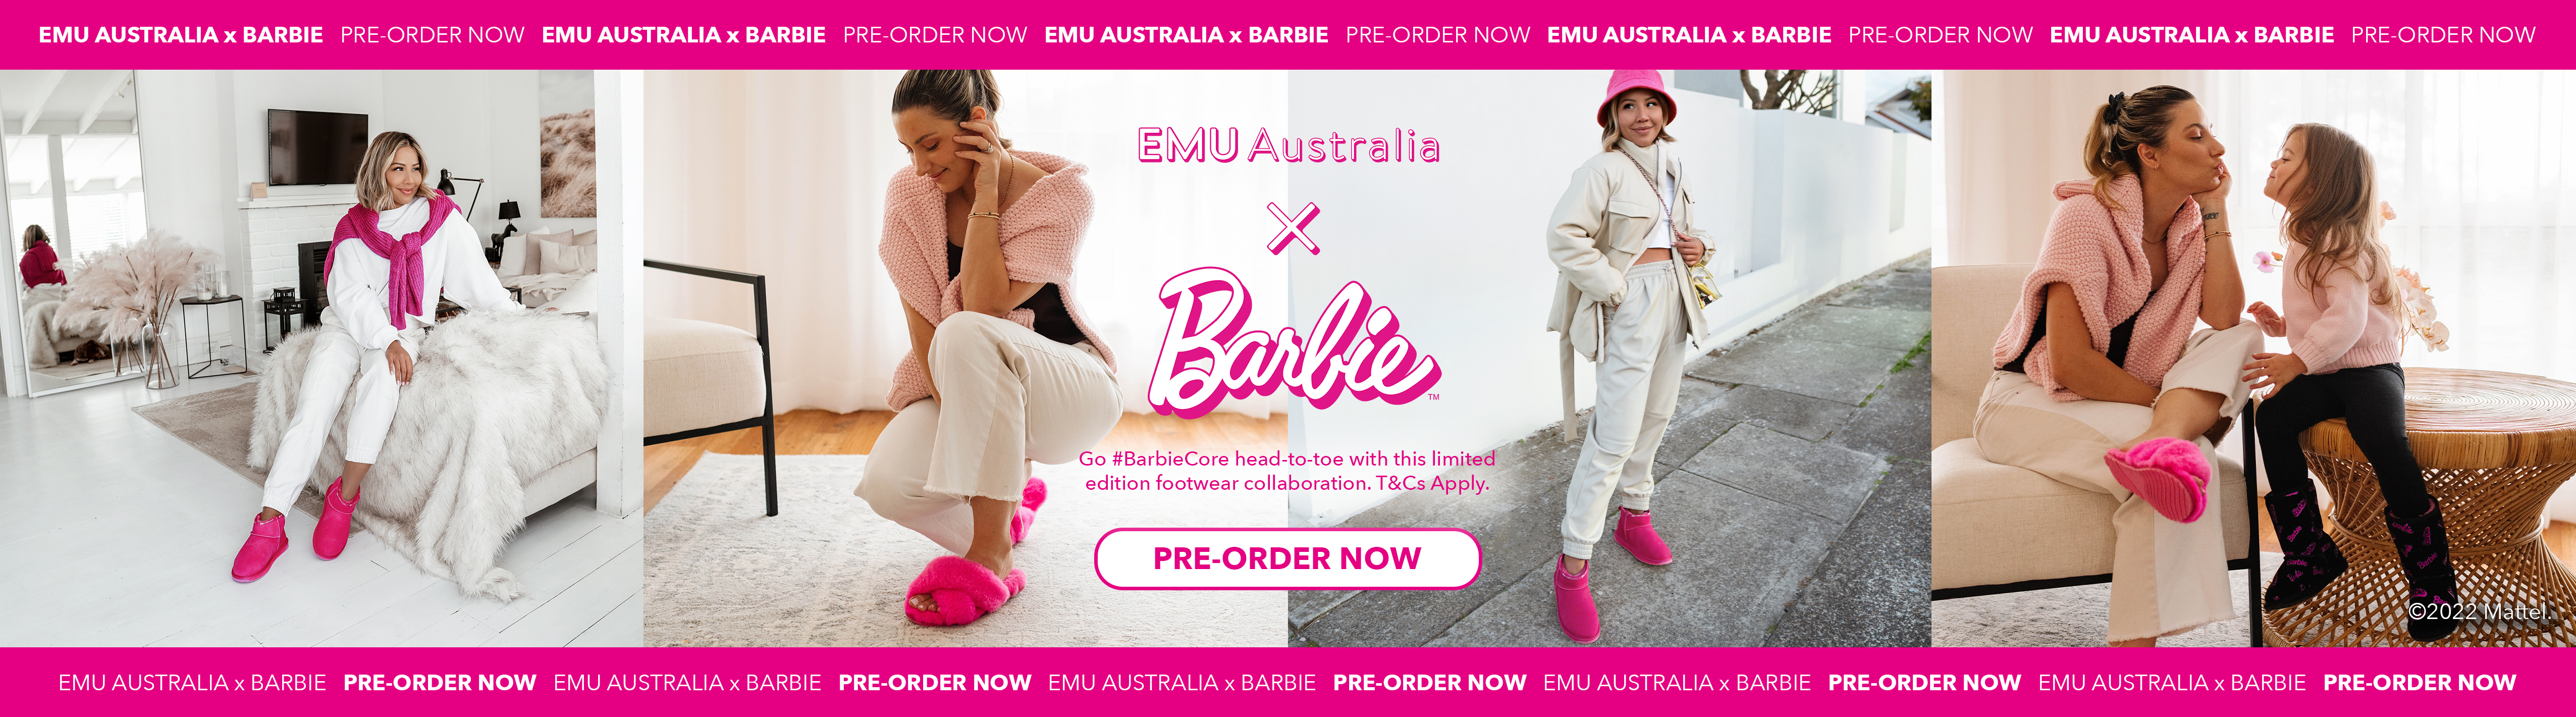 Woman wearing pink sheepskin boots in lounge, woman crouching down wearing pink sheepskin slippers insode,
                woman standing outside wearing pink sheepskin boots, mother and daughtersmiling at each other wearing limited edition barbie womens slippers and kids boots.
                Pre-order EMU x BARBIE Collab now.